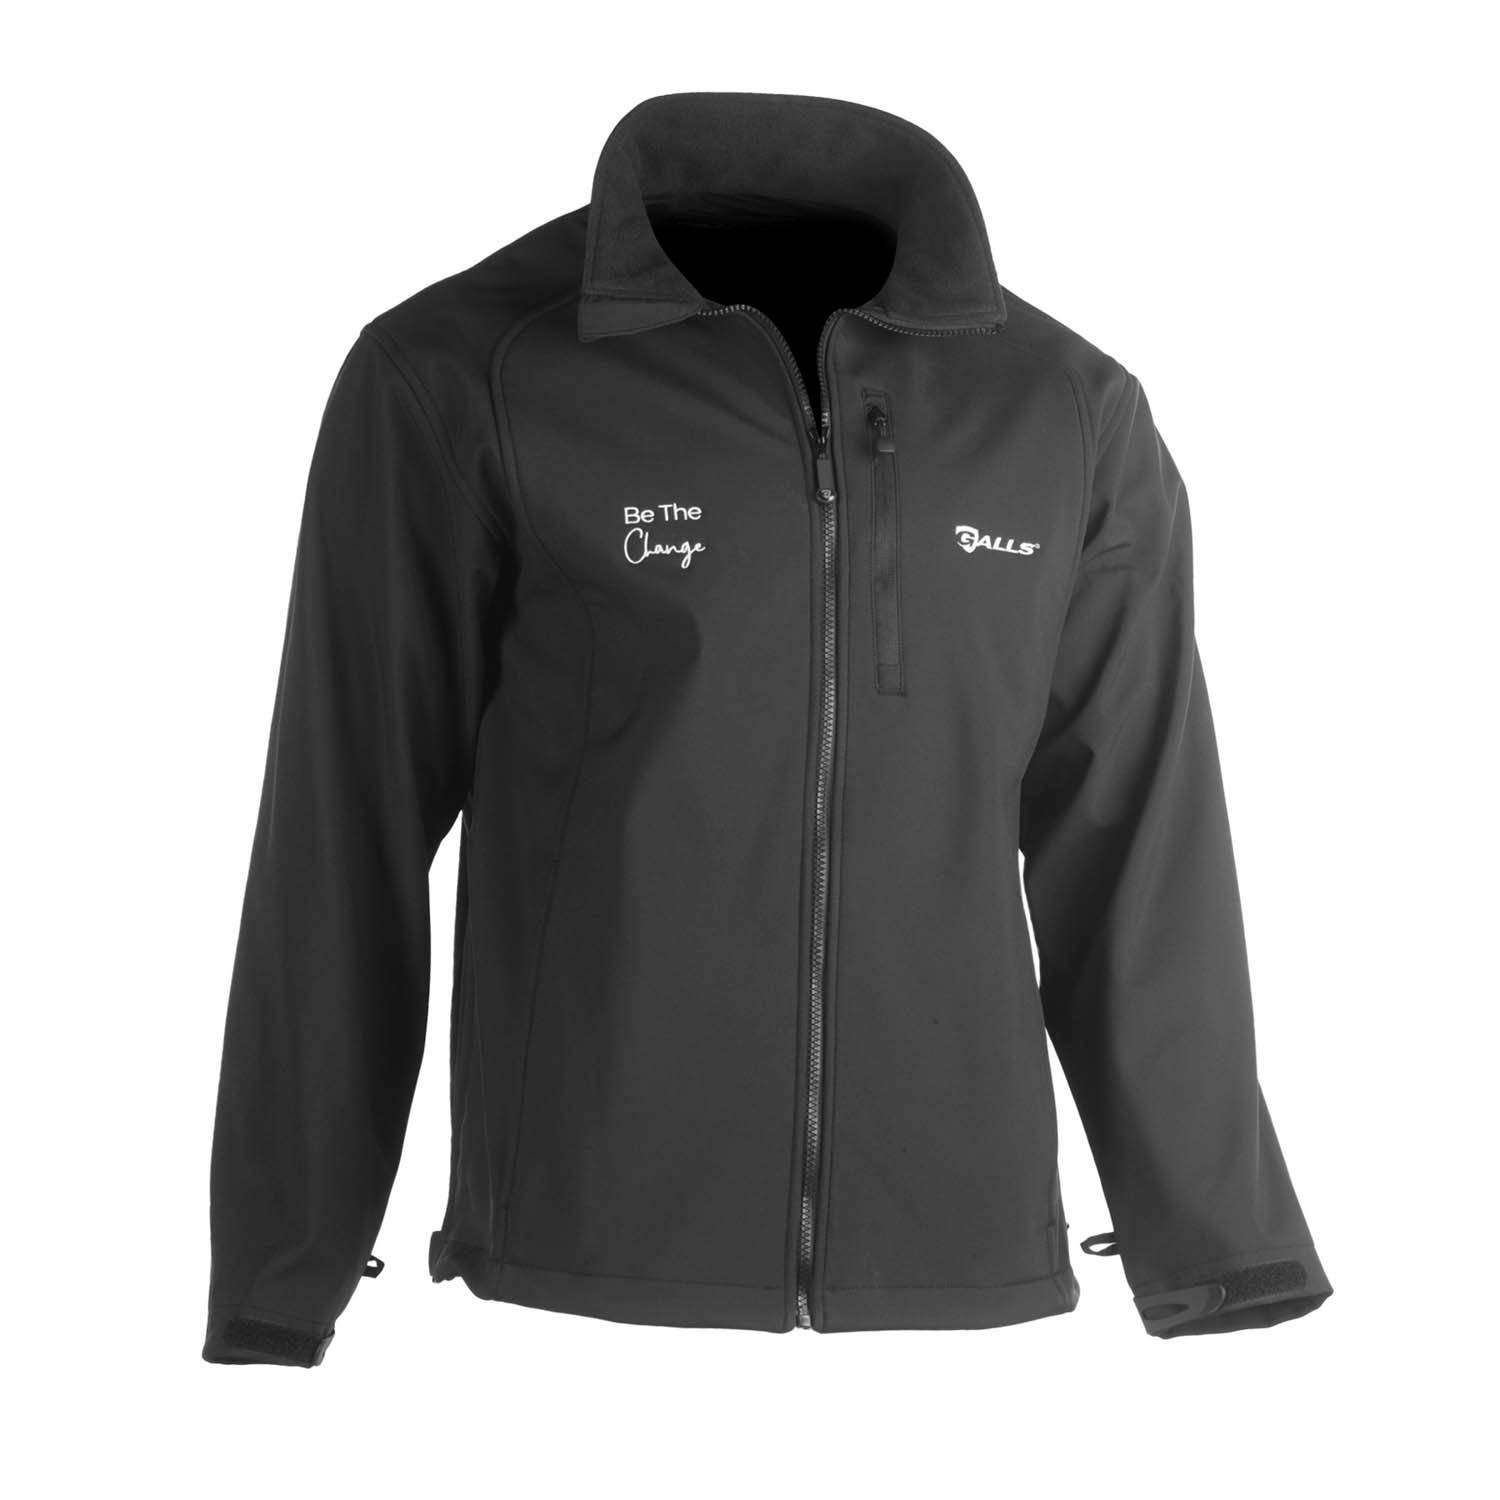 GALLS MEN'S "BE THE CHANGE" SOFT SHELL JACKET